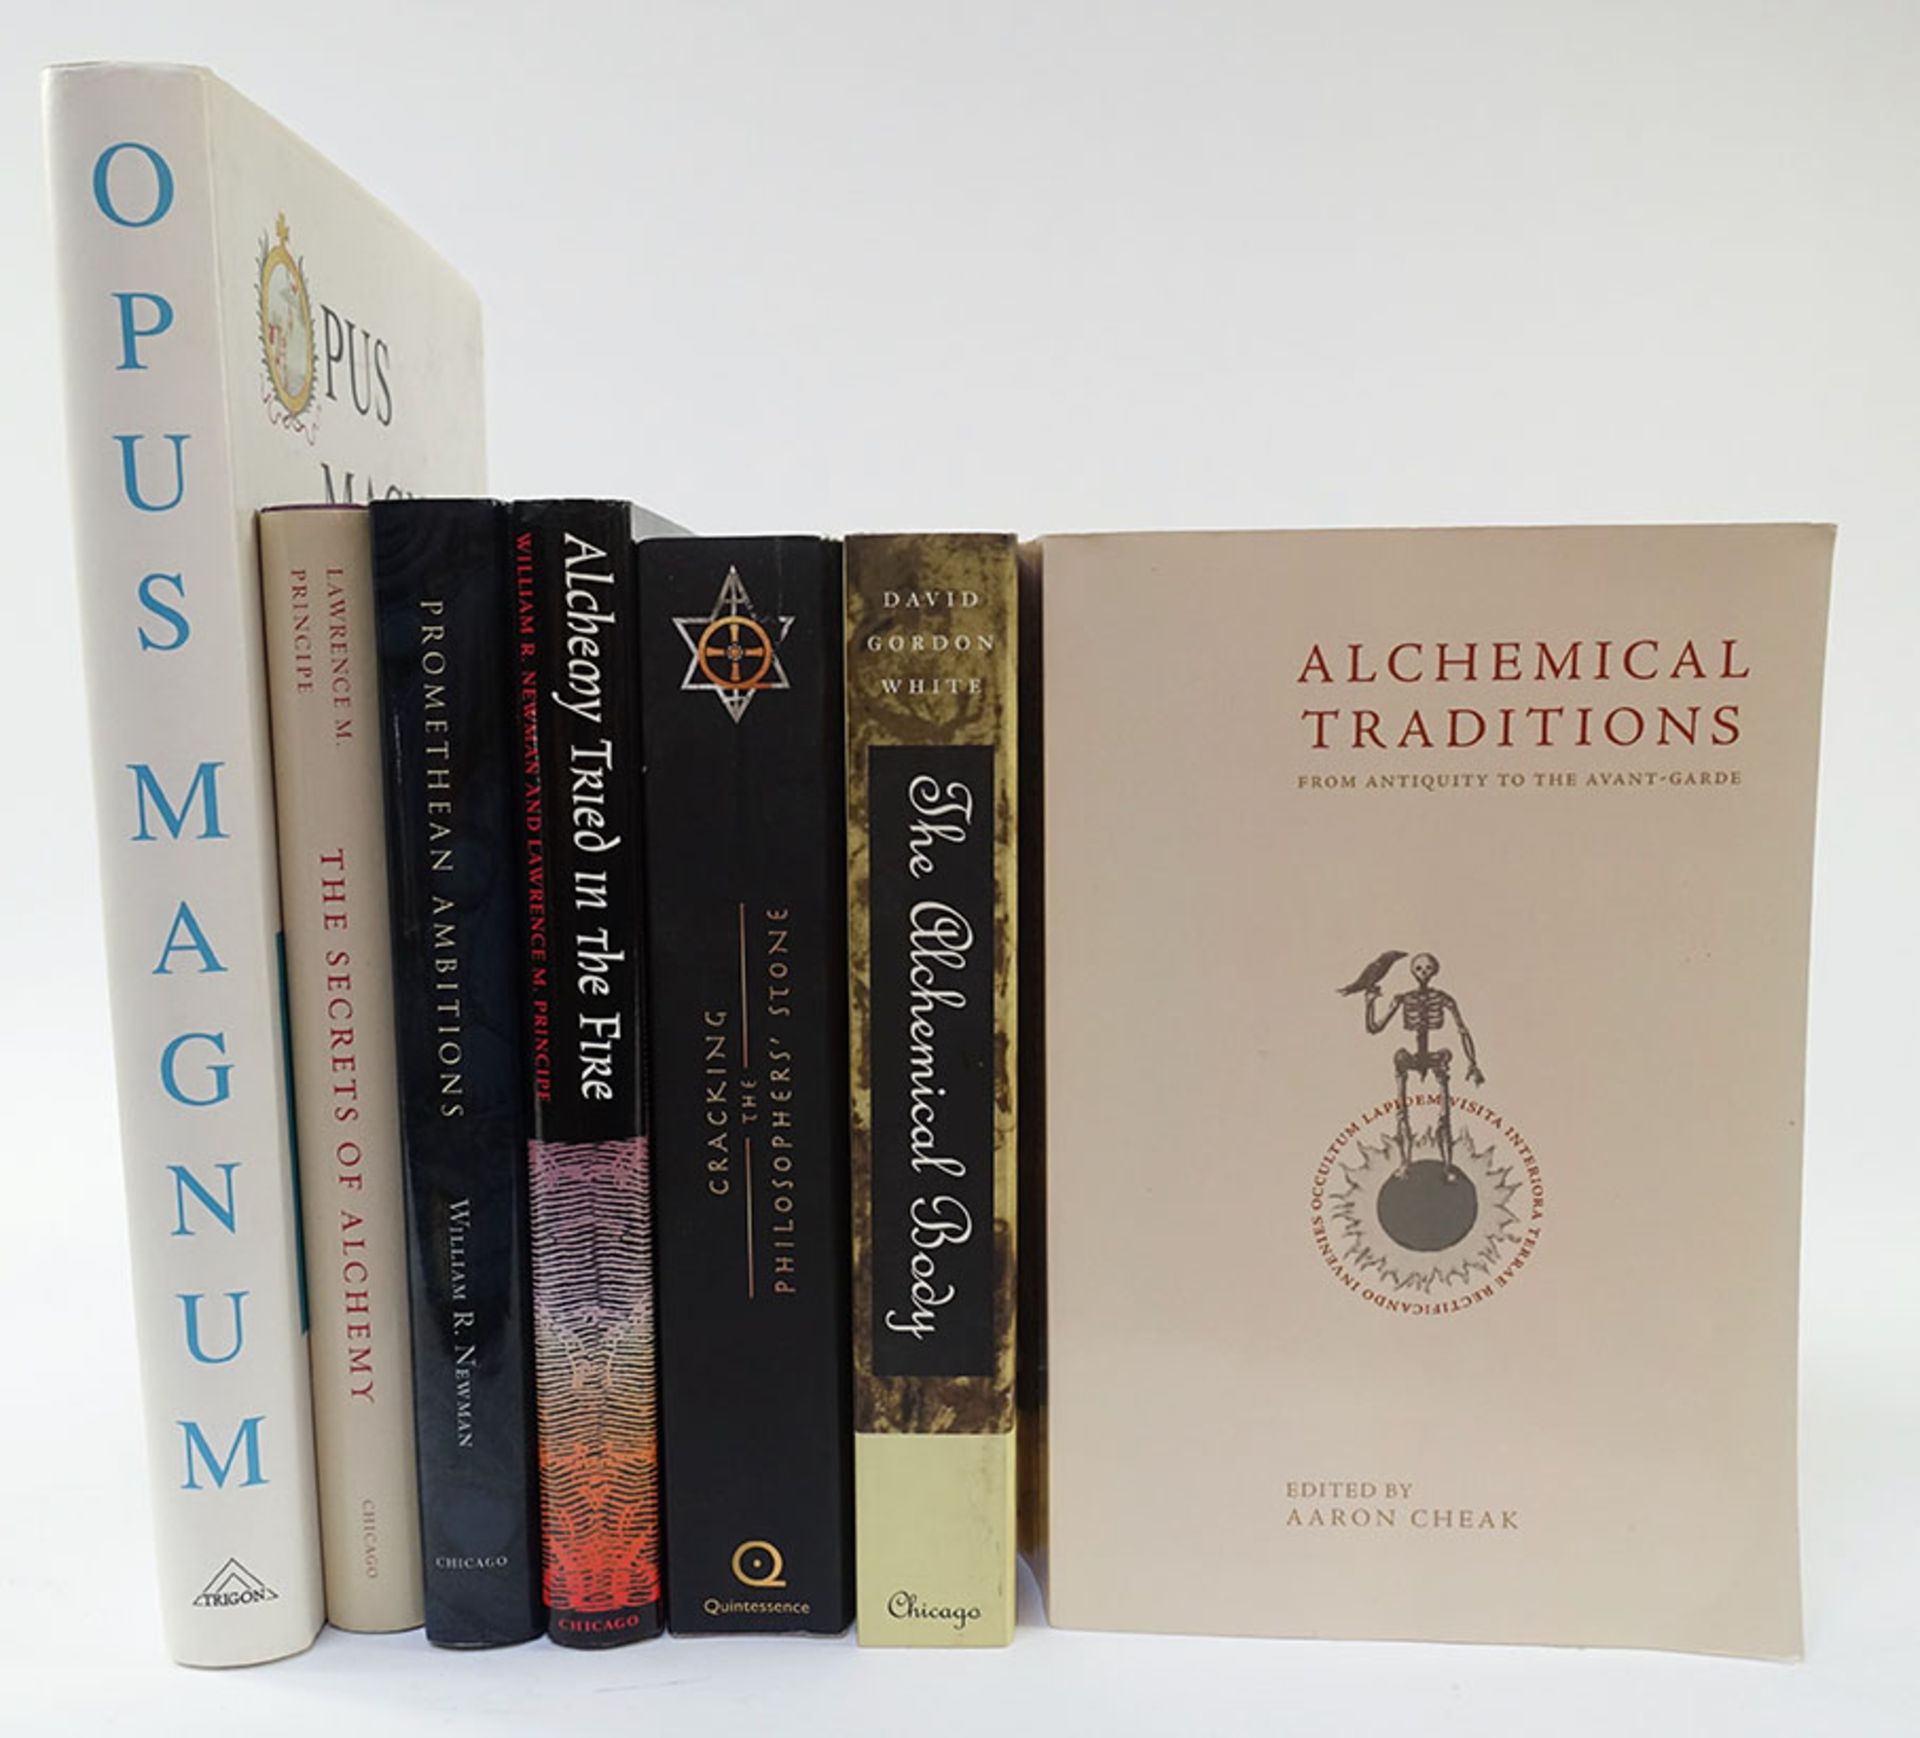 ALCHEMY -- CHEAK, A., ed. Alchemical traditions from antiquity to the Avant-Garde. 2013.